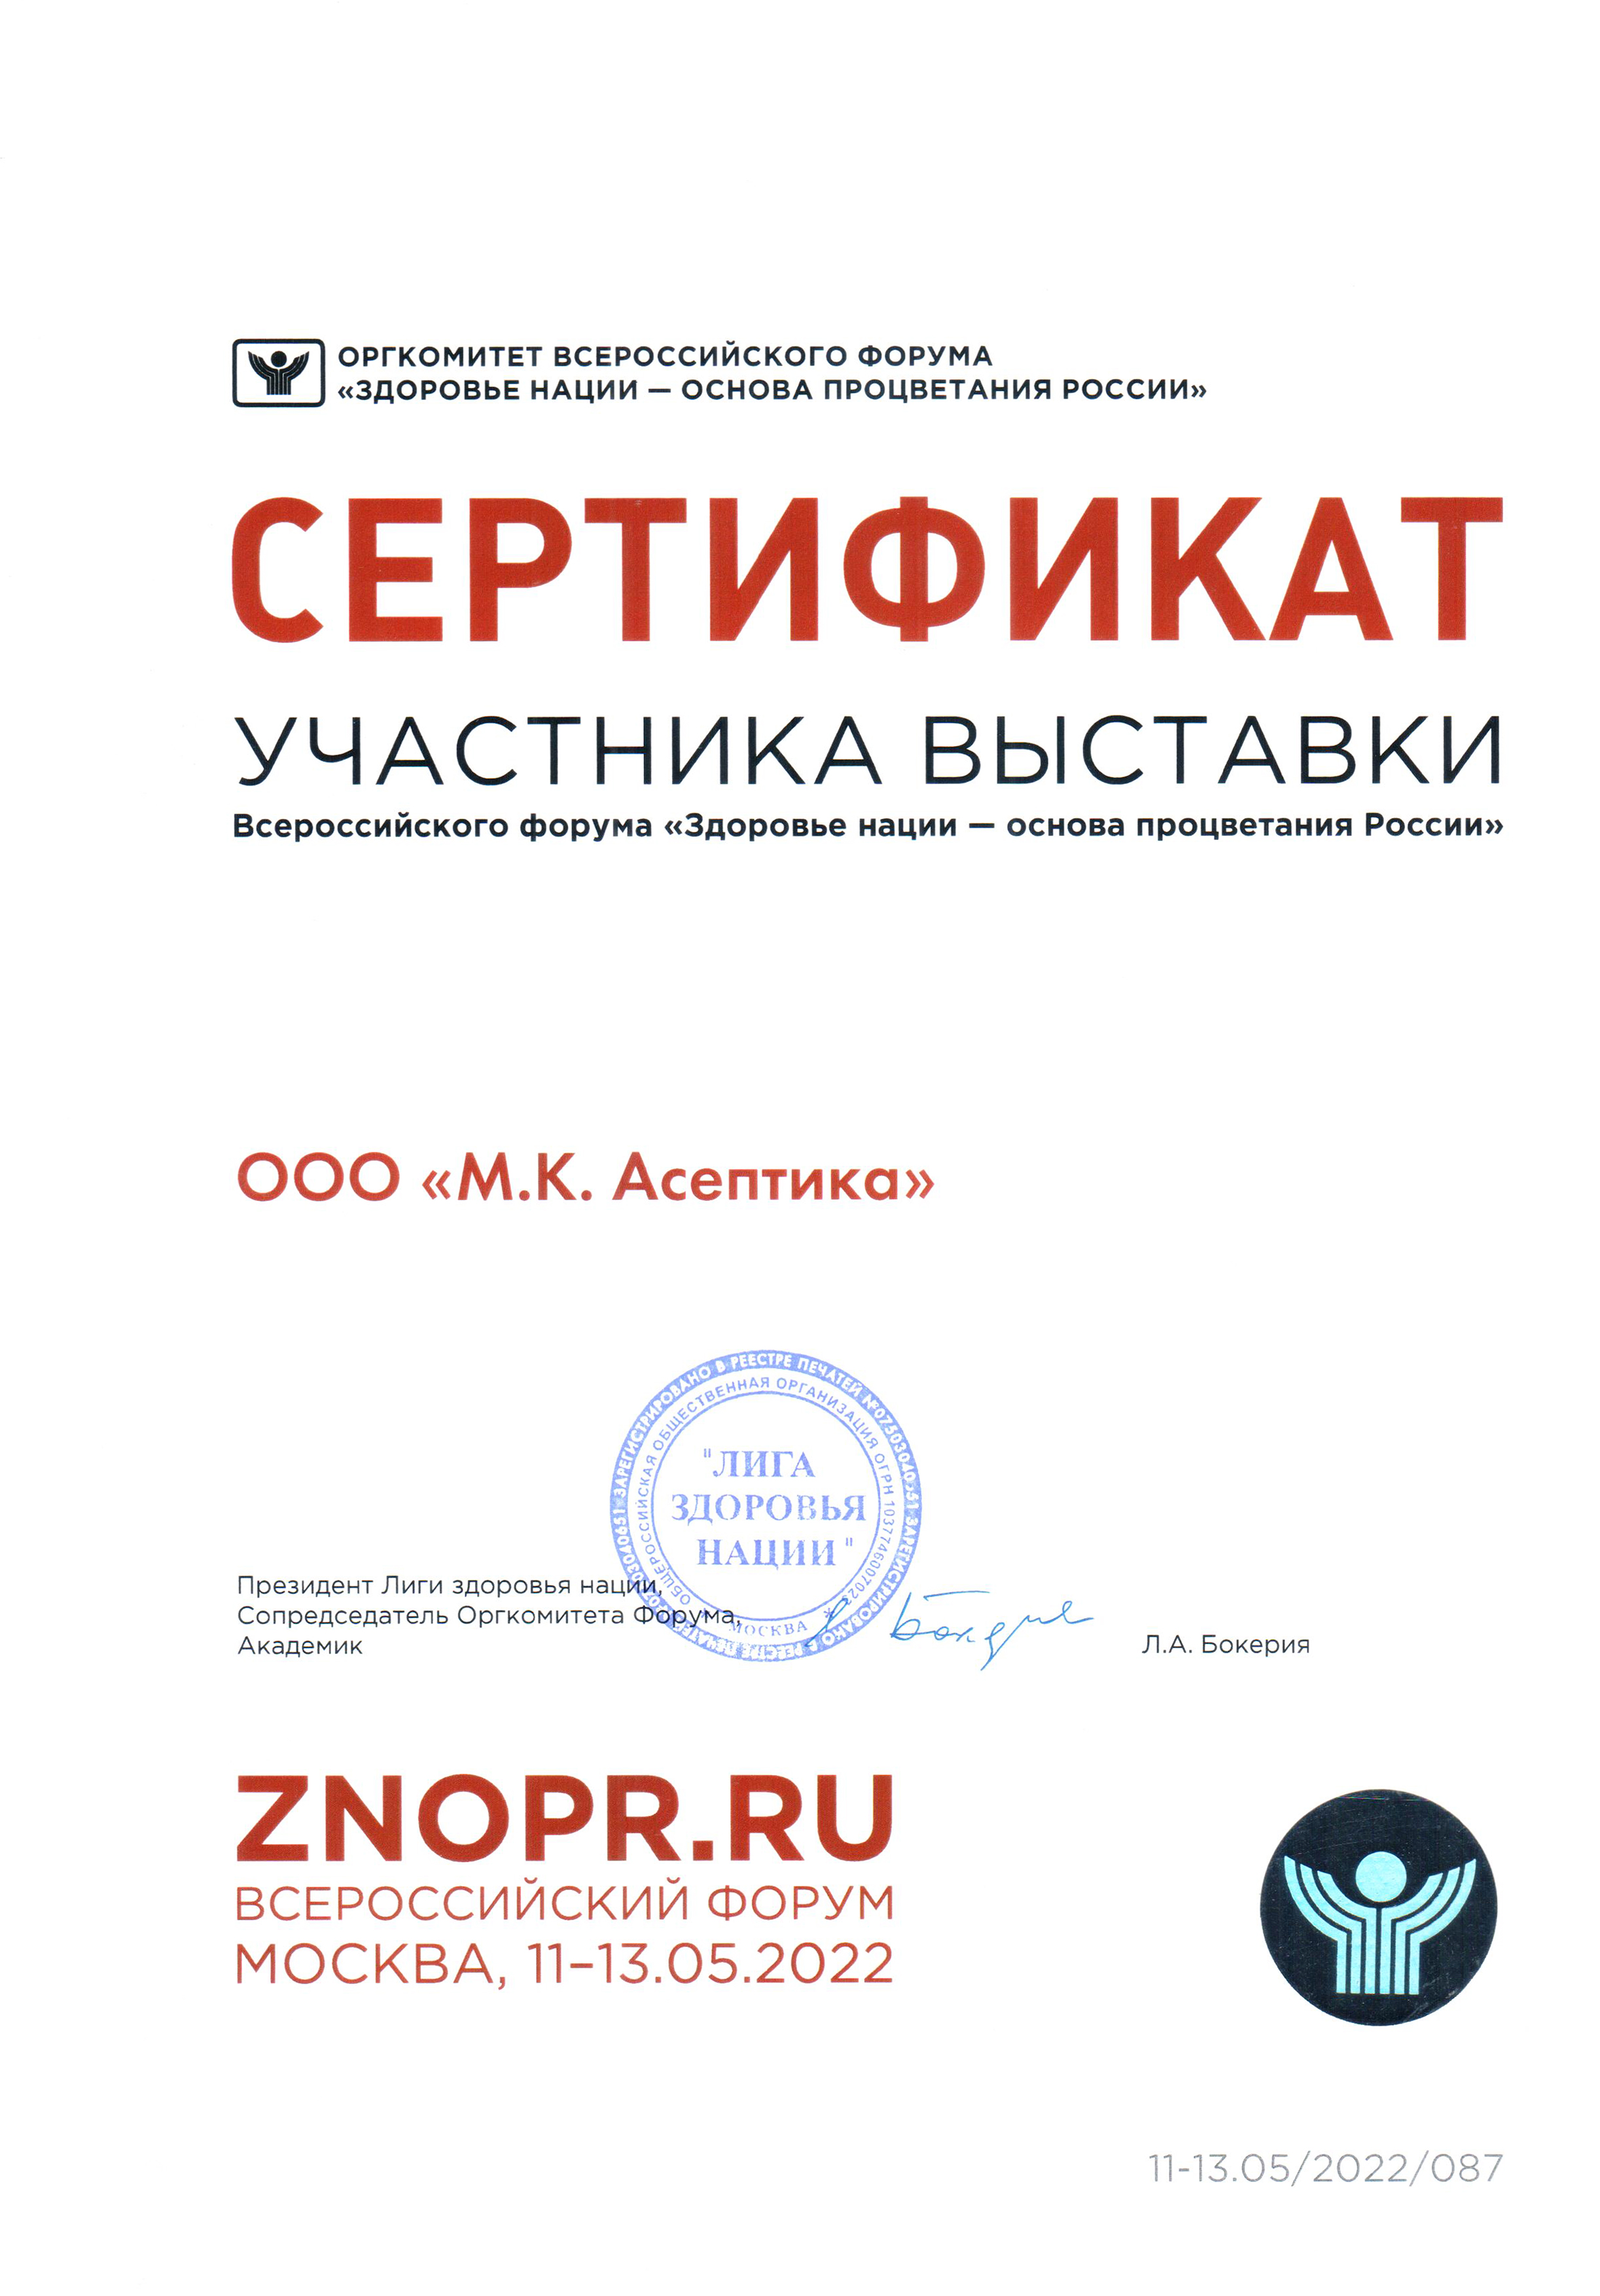 Certificate of participation in the "Health of the nation as the Foundation of Russia's Prosperity" exhibition of the All-Russian Forum